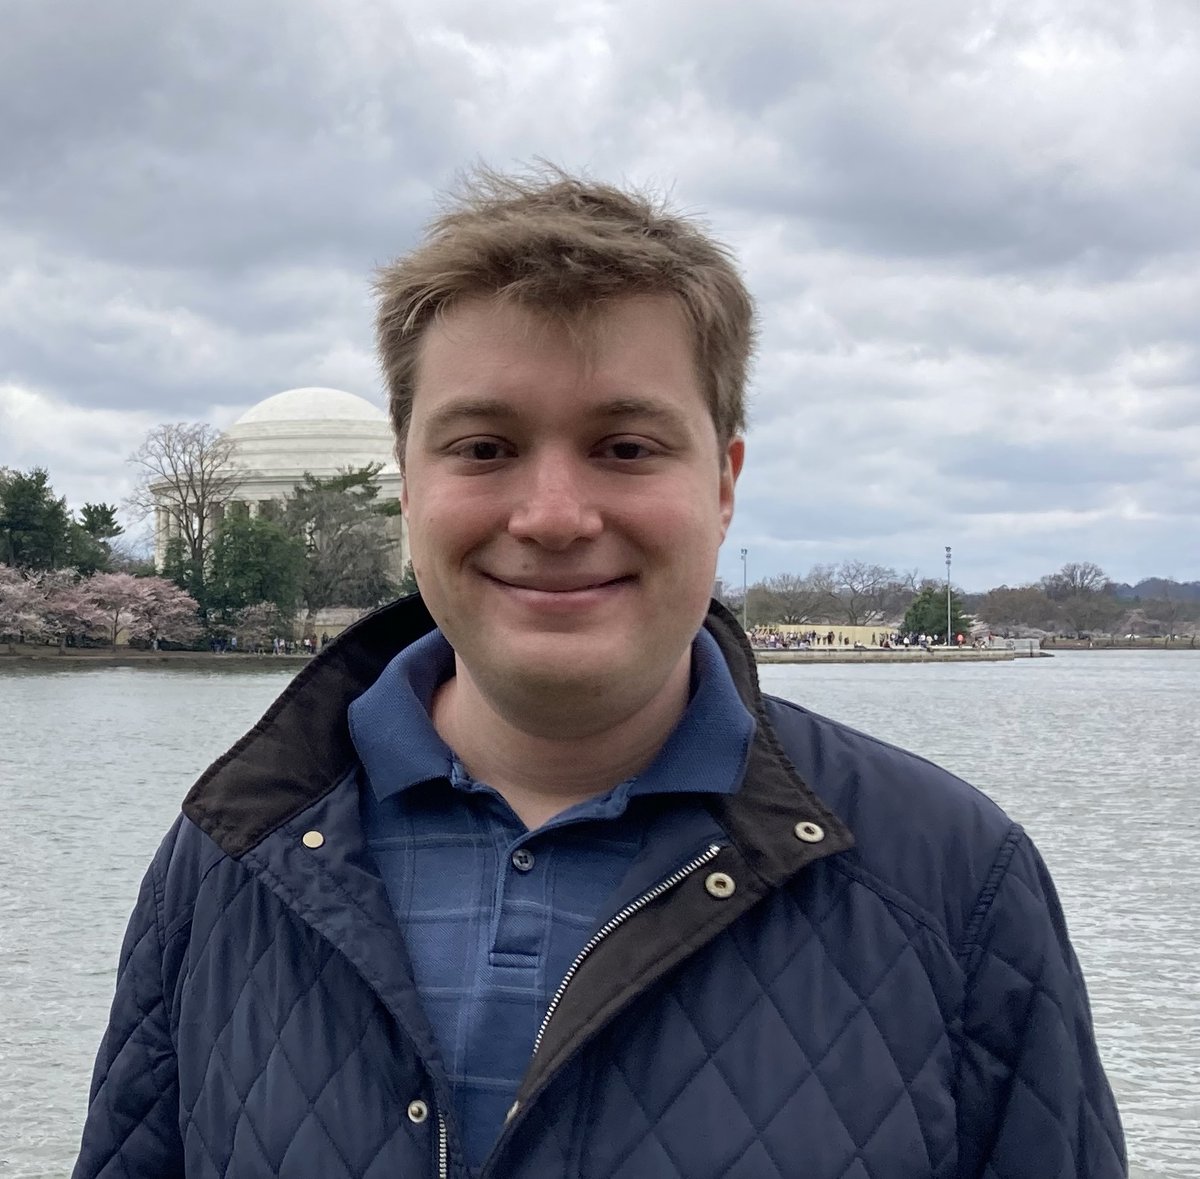 👏Congrats to Alexander Levine on receiving the Charles A. Caramello Distinguished Dissertation Award. Levine was recognized for his 2023 dissertation, which introduces innovative methods for ensuring the robustness of machine learning models. Read more: go.umd.edu/Levine